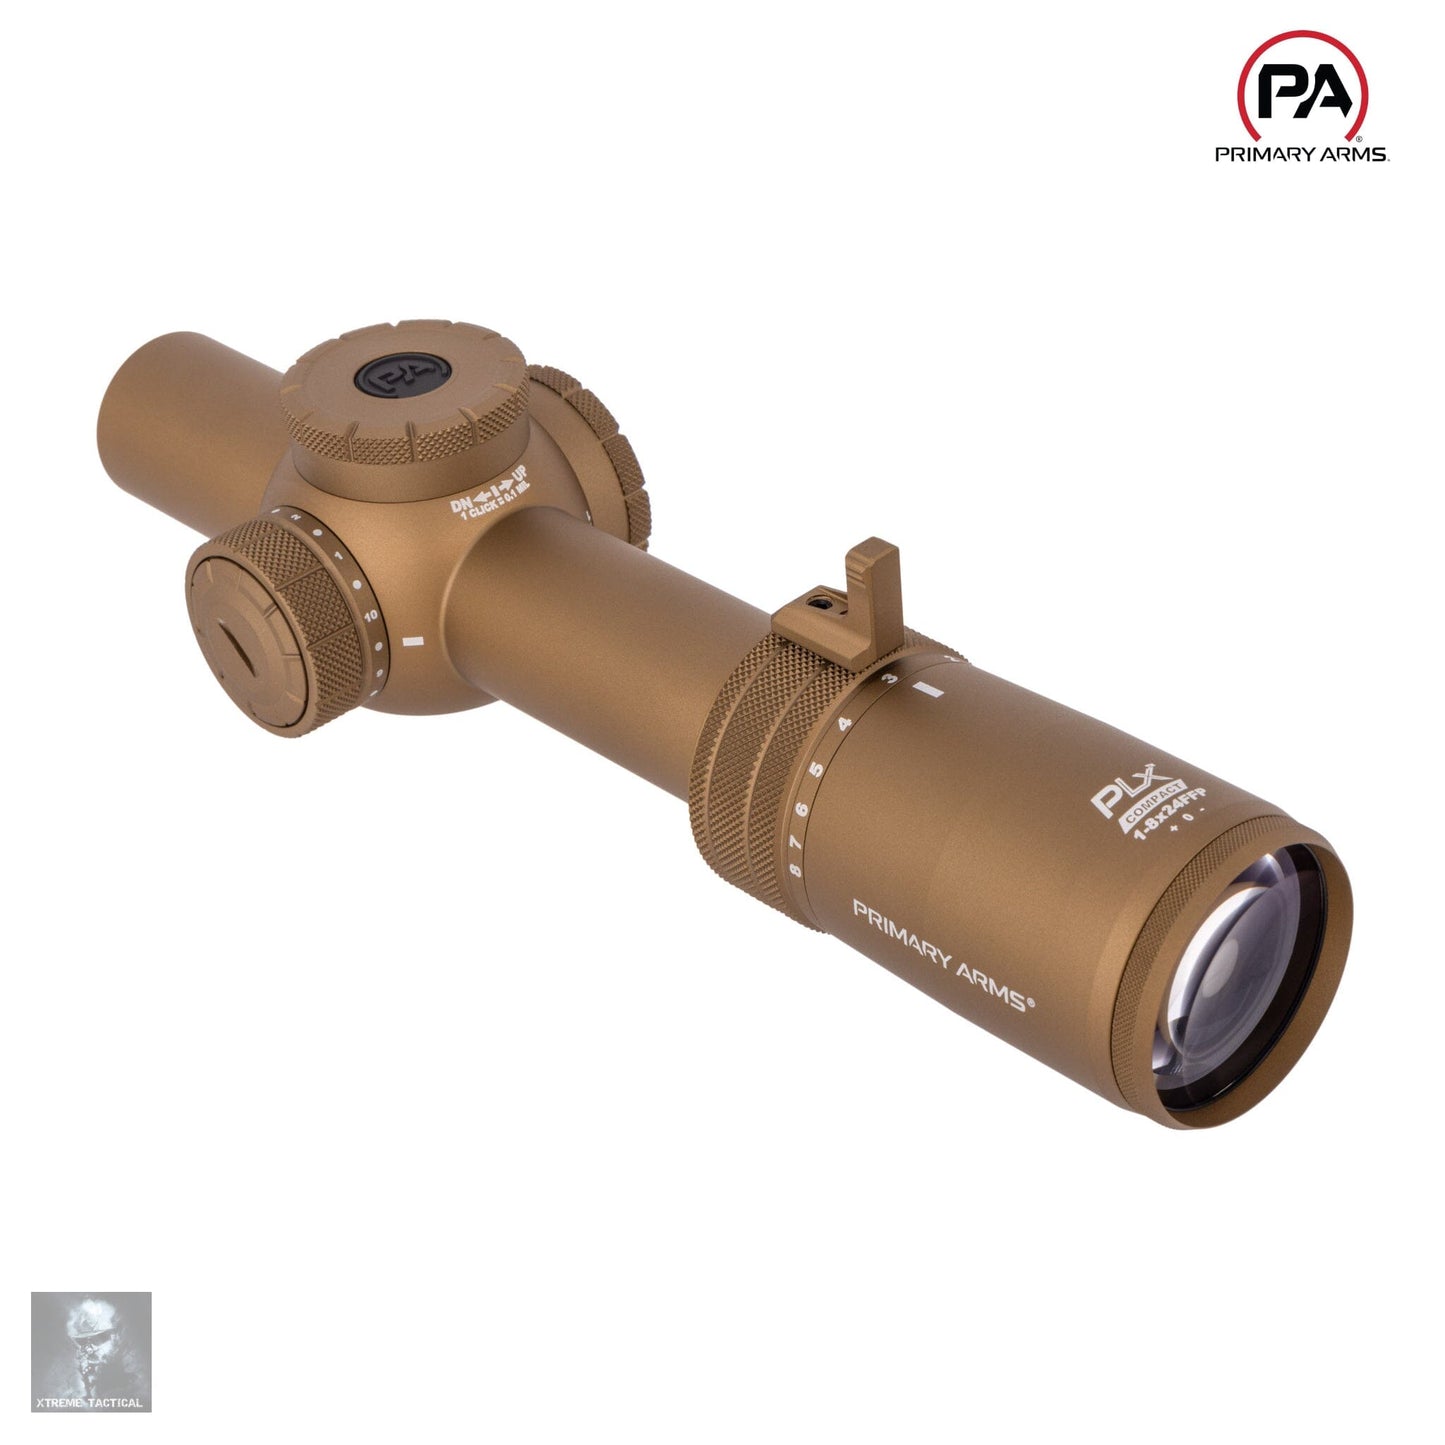 Primary Arms Compact PLxC 1-8x24 FFP Rifle Scope - ACSS Griffin MIL M8 Reticle - FDE LPVO Rifle Scope Primary Arms 